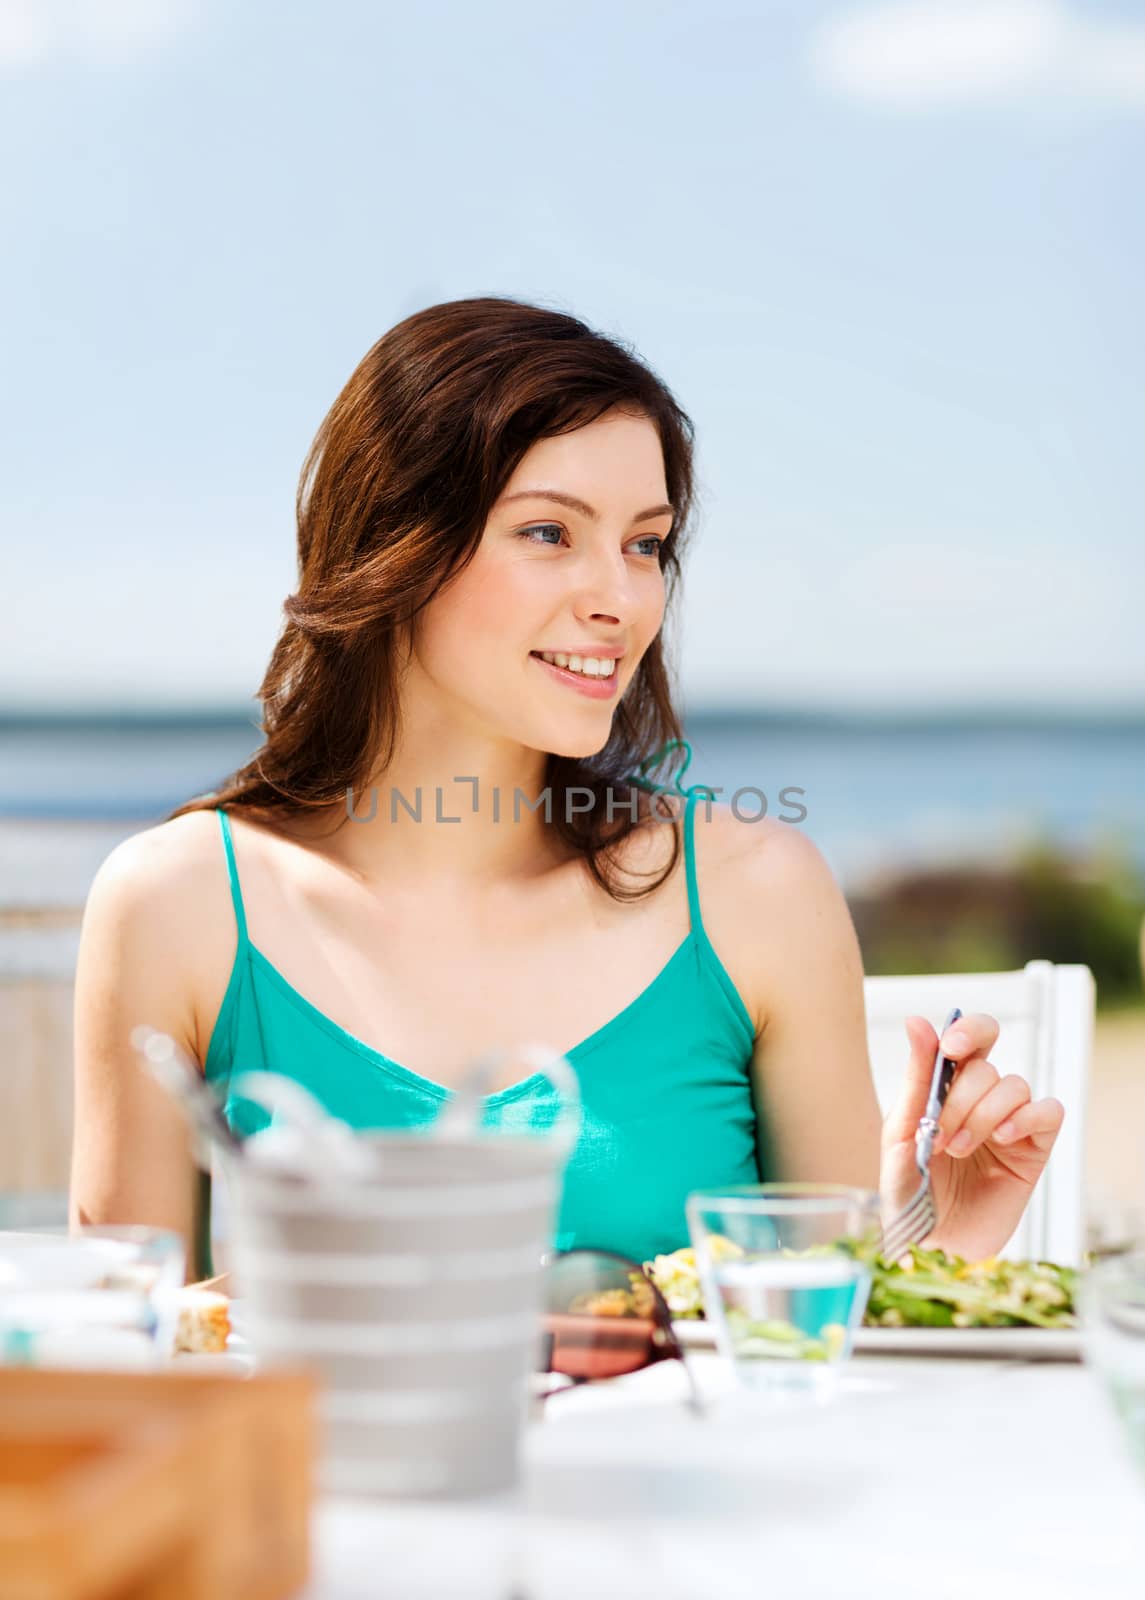 summer holidays and vacation - girl eating in cafe on the beach